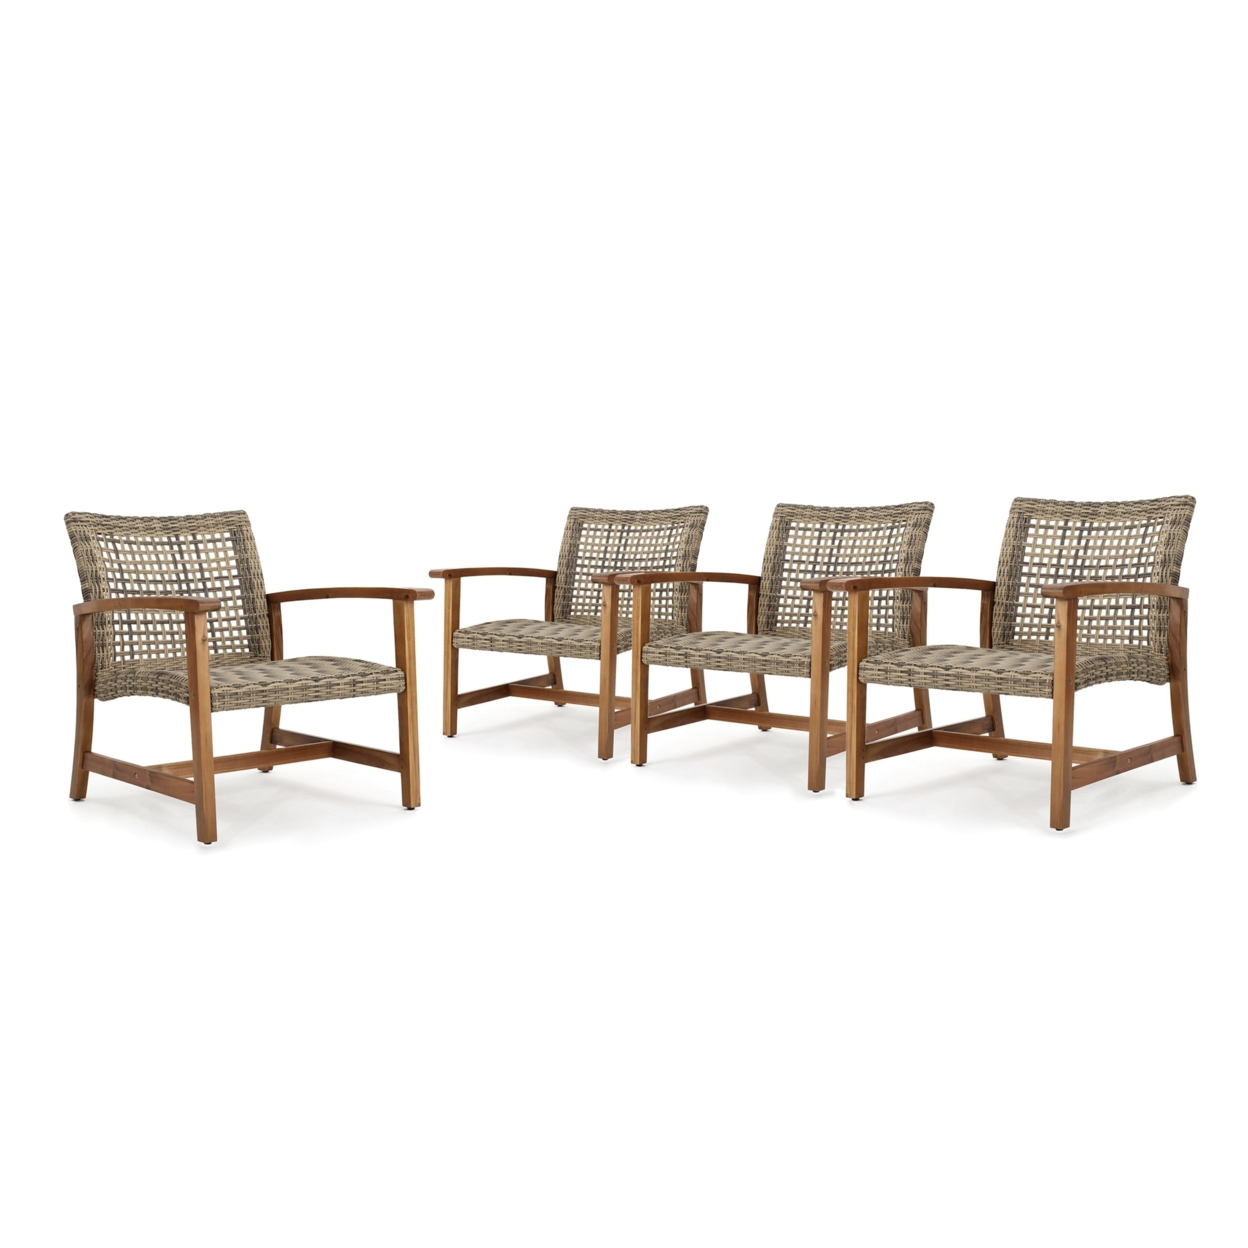 Cytheria Outdoor Mid Century Gray Wicker Club Chairs With Wood Frame (Set Of 4)